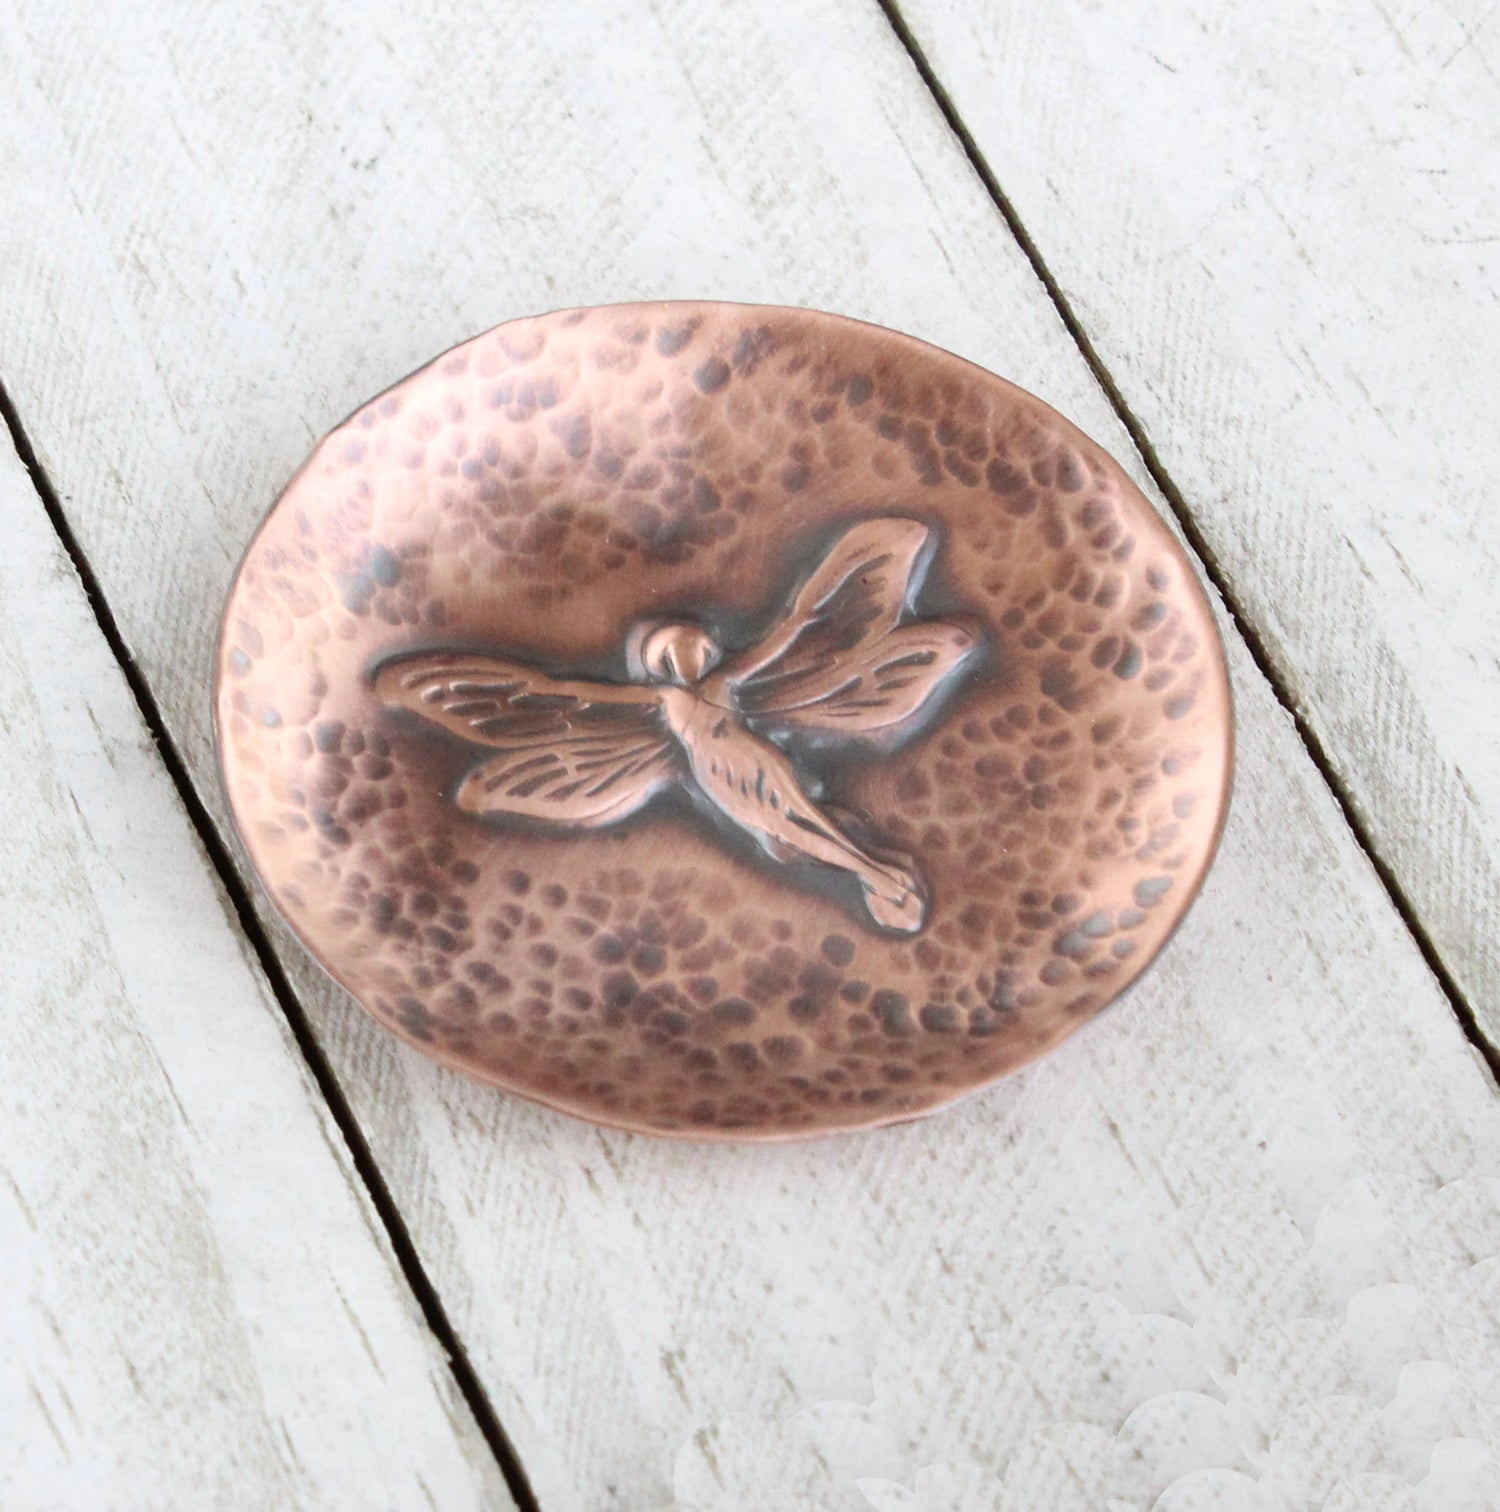 Small copper copper dish for rings, jewelry, trinkets. In middle there is a raised image of a fairy in flight. The background is dappled hammer texture, the sides are raised to form a shallow bowl.